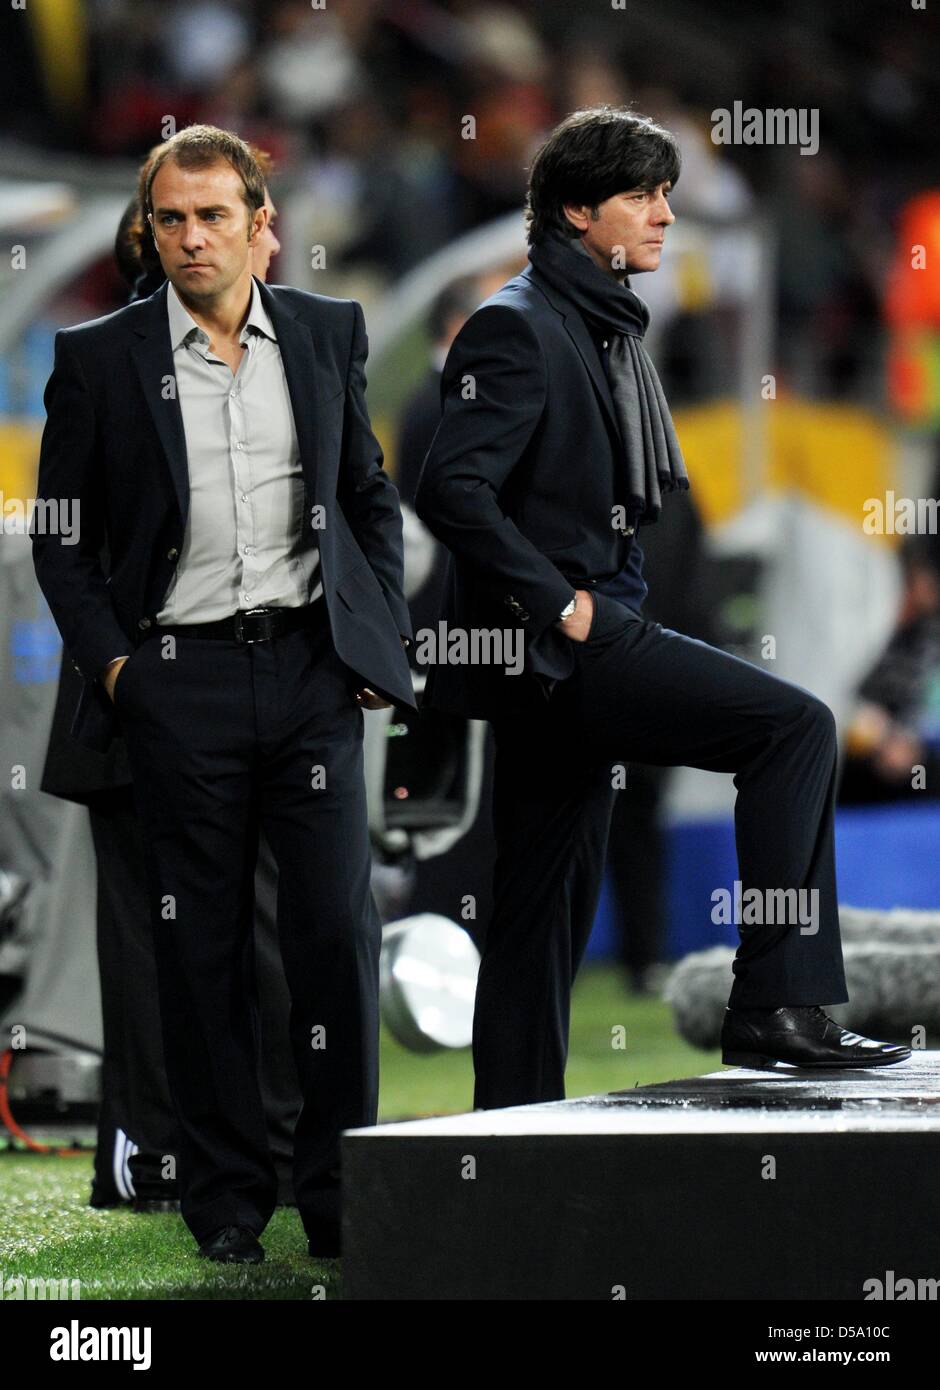 Headcoach Joachim Loew (R) and assistant coach Hans-Dieter Flick of Germany prior the 2010 FIFA World Cup third place match between Uruguay and Germany at the Nelson Mandela Bay Stadium in Port Elizabeth, South Africa 10 July 2010. Photo: Bernd Weissbrod dpa - Please refer to http://dpaq.de/FIFA-WM2010-TC Stock Photo